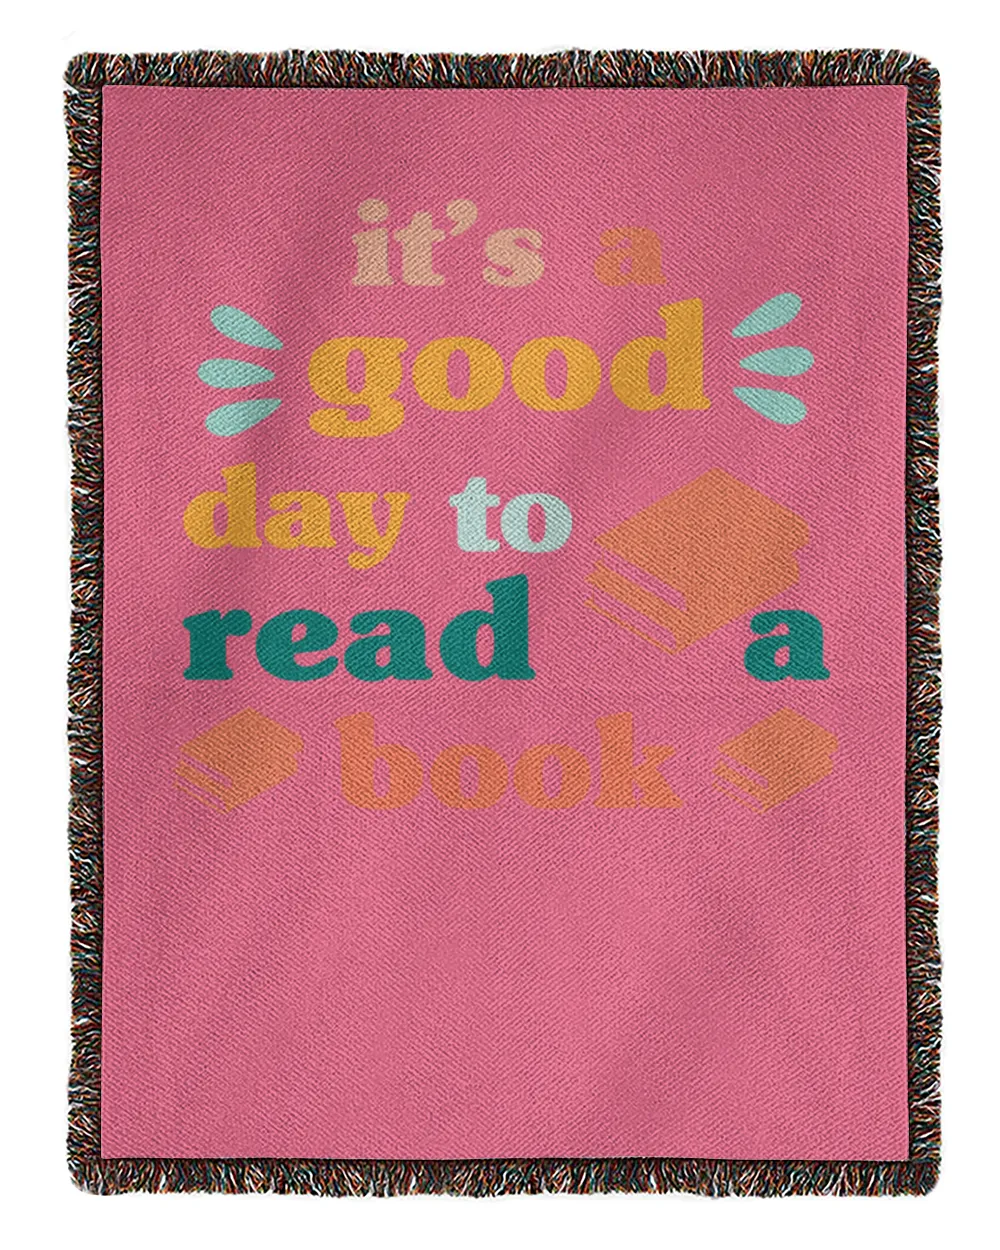 It's A Good Day To Read A Book